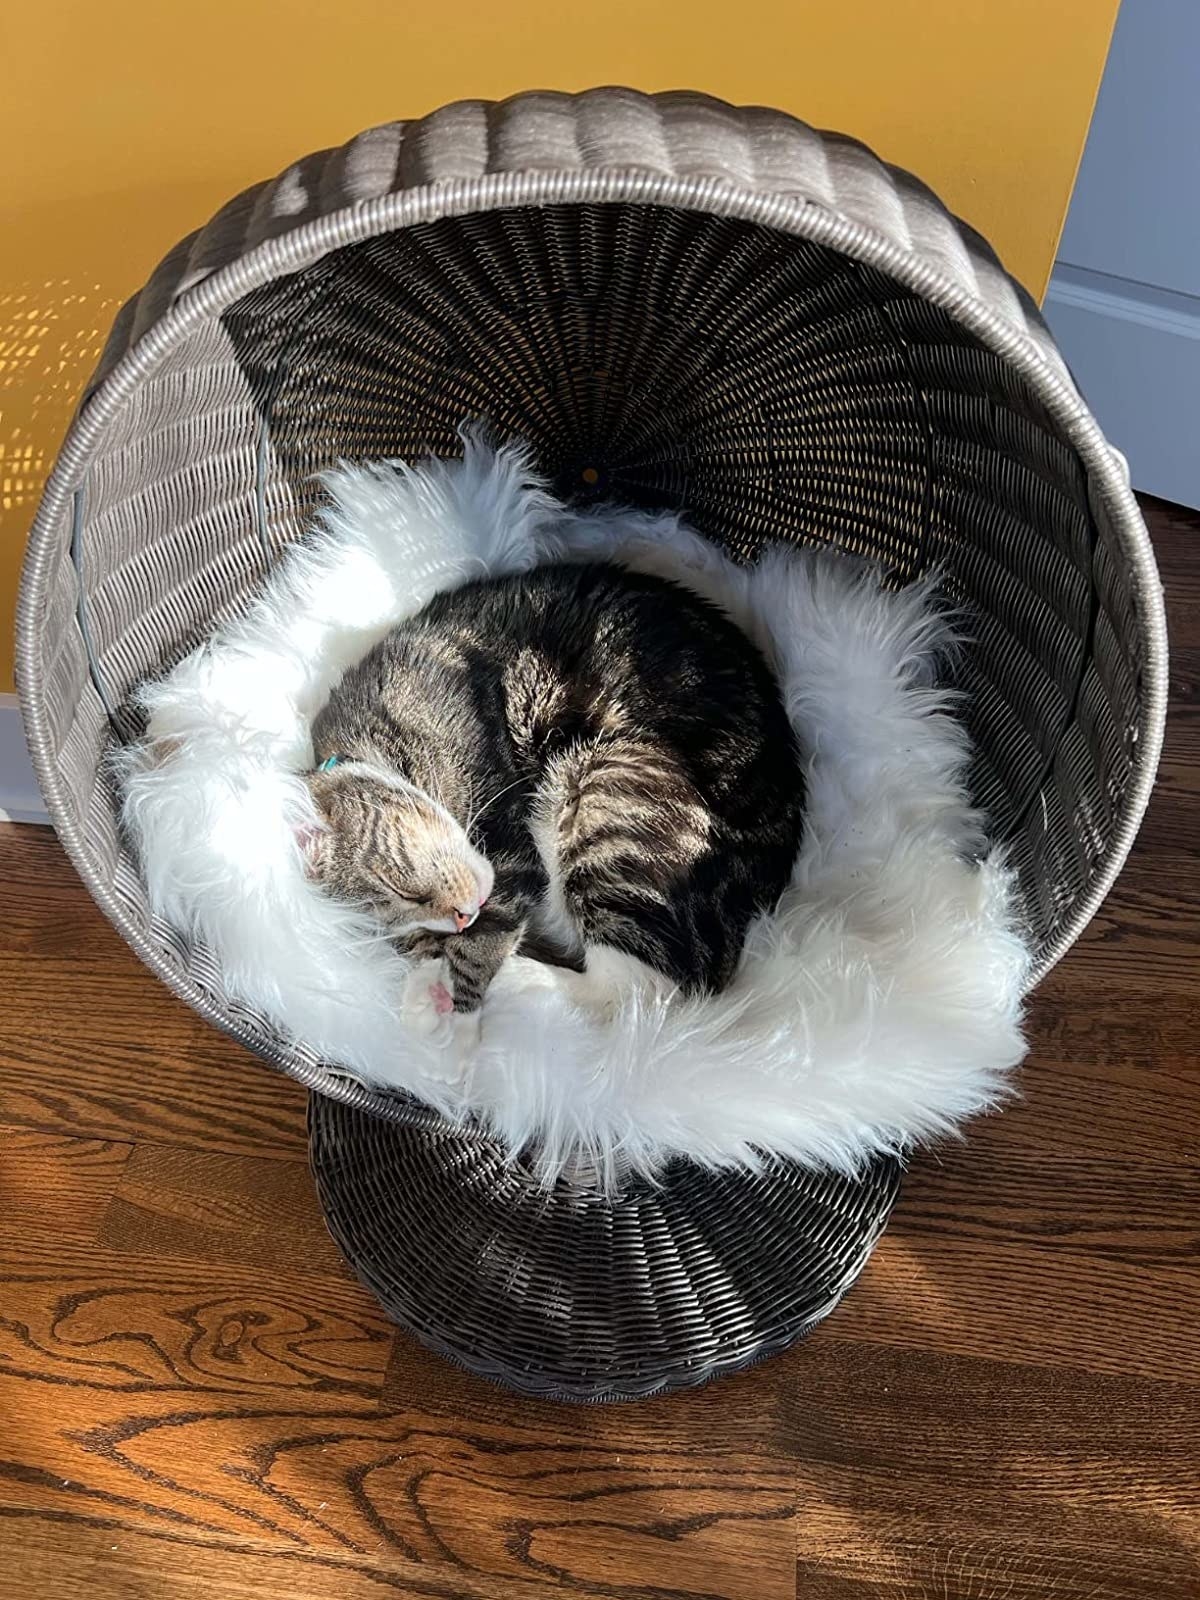 reviewer&#x27;s cat curled up inside the raised, curved rattan bed